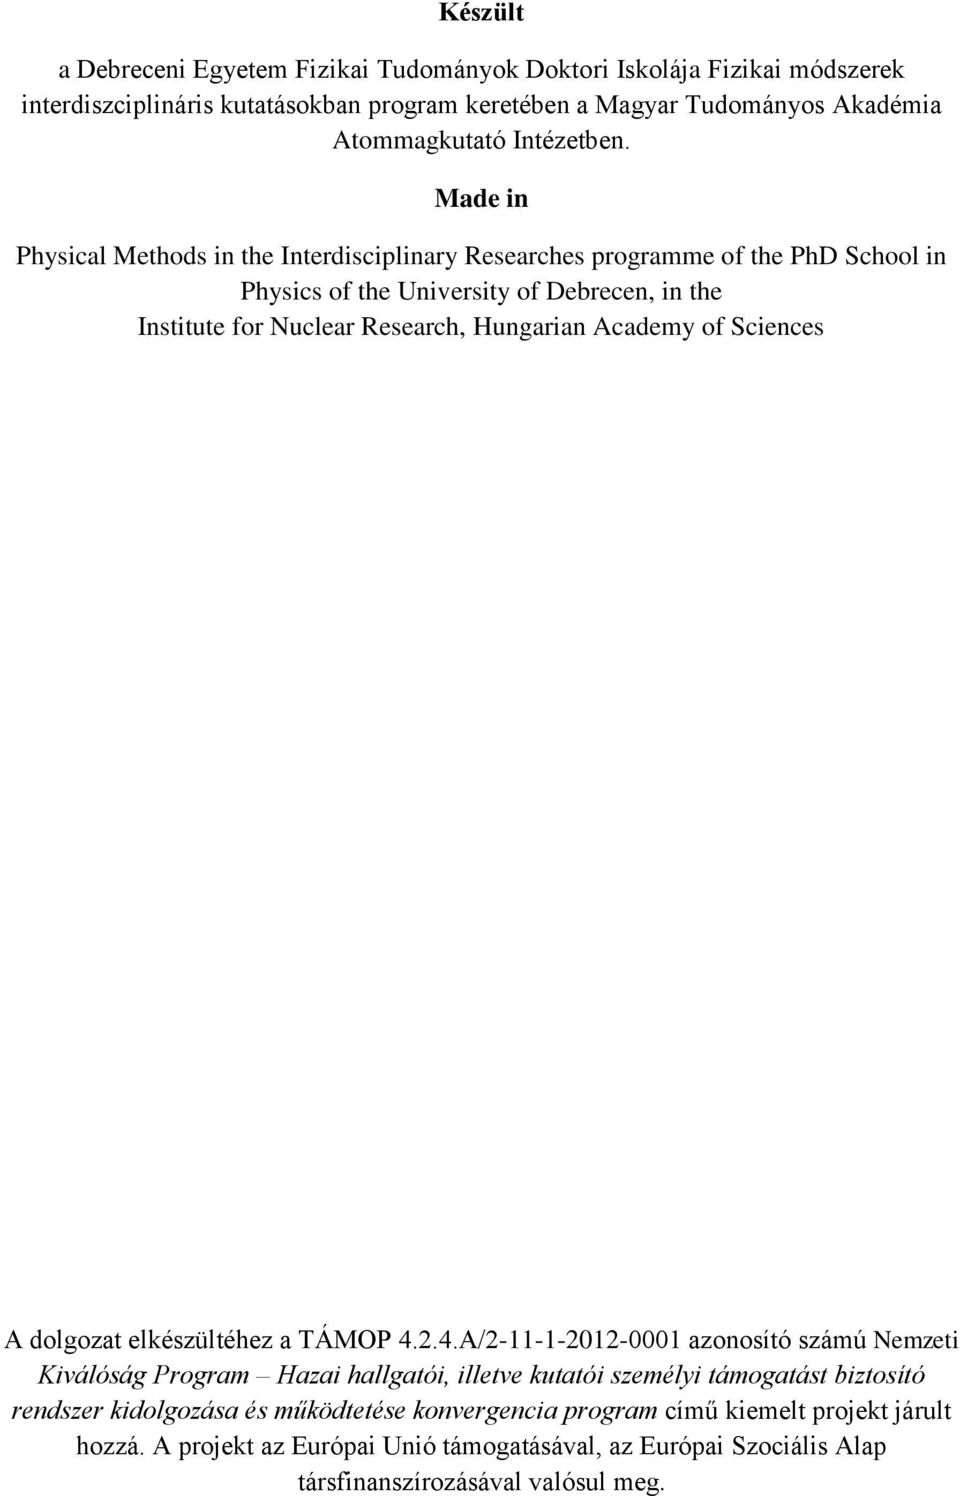 Made in Physical Methods in the Interdisciplinary Researches programme of the PhD School in Physics of the University of Debrecen, in the Institute for Nuclear Research, Hungarian